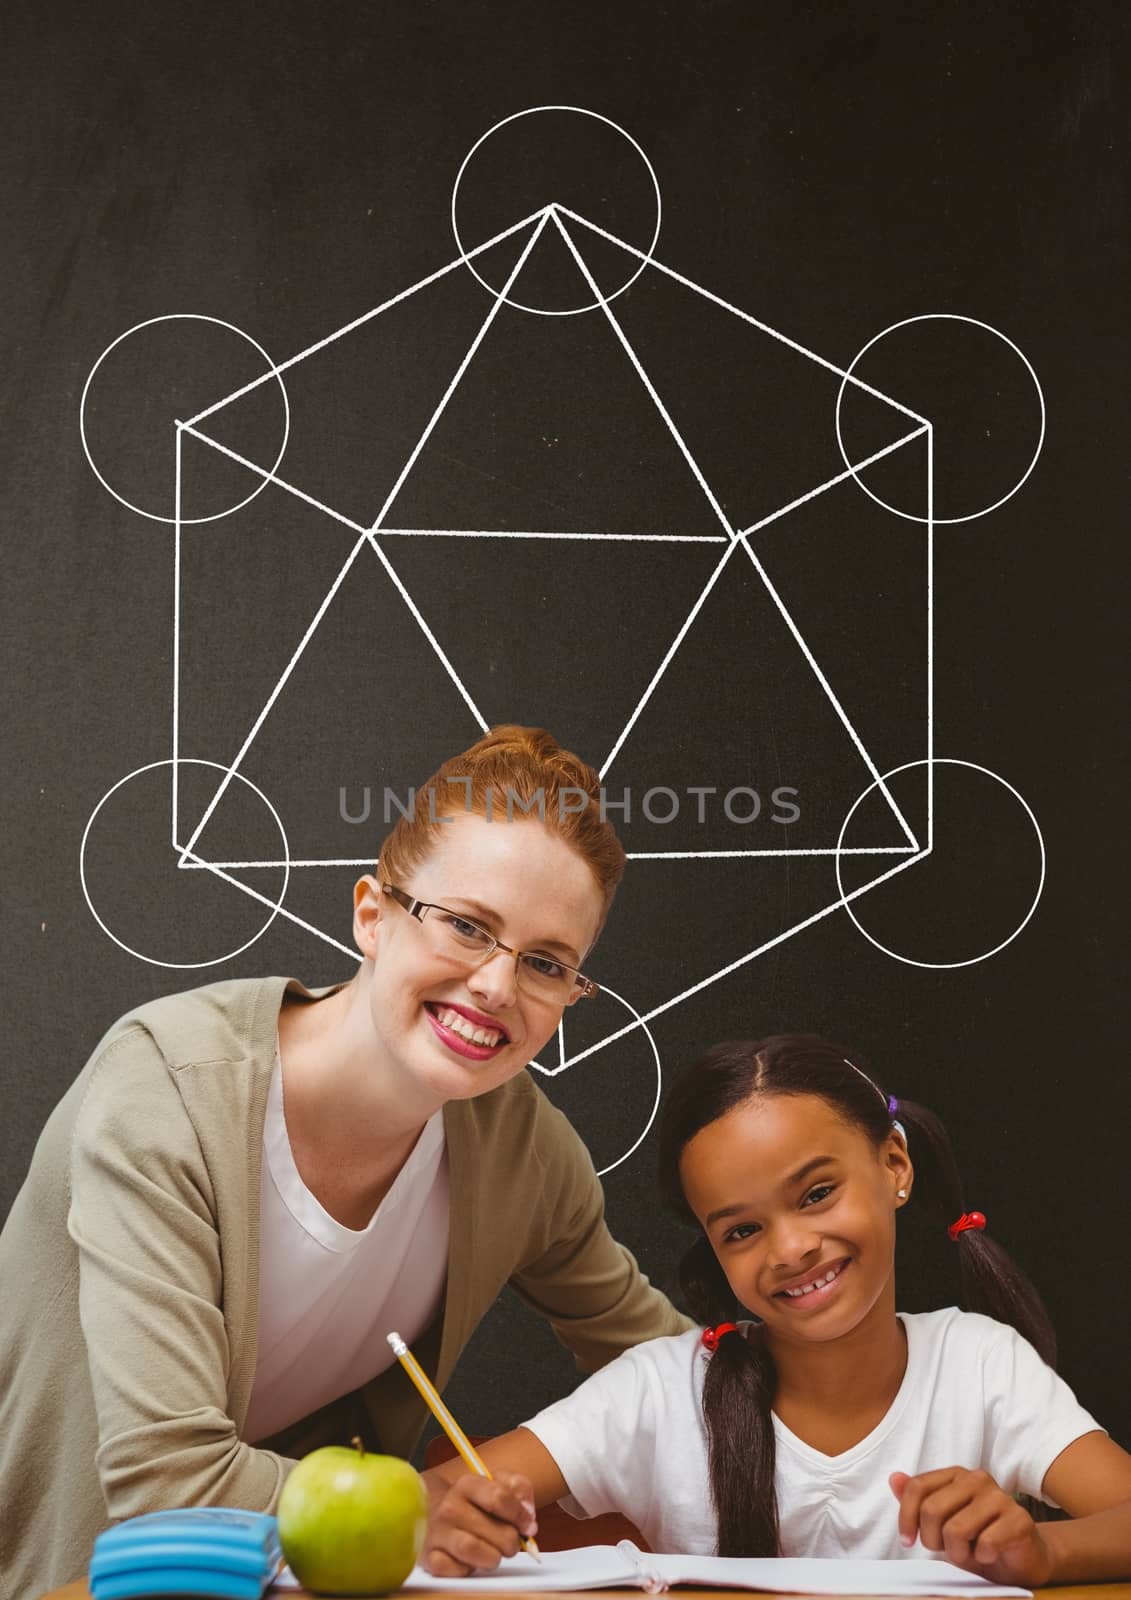 Digital composite of Happy student girl and teacher at table against grey blackboard with school and education graphic